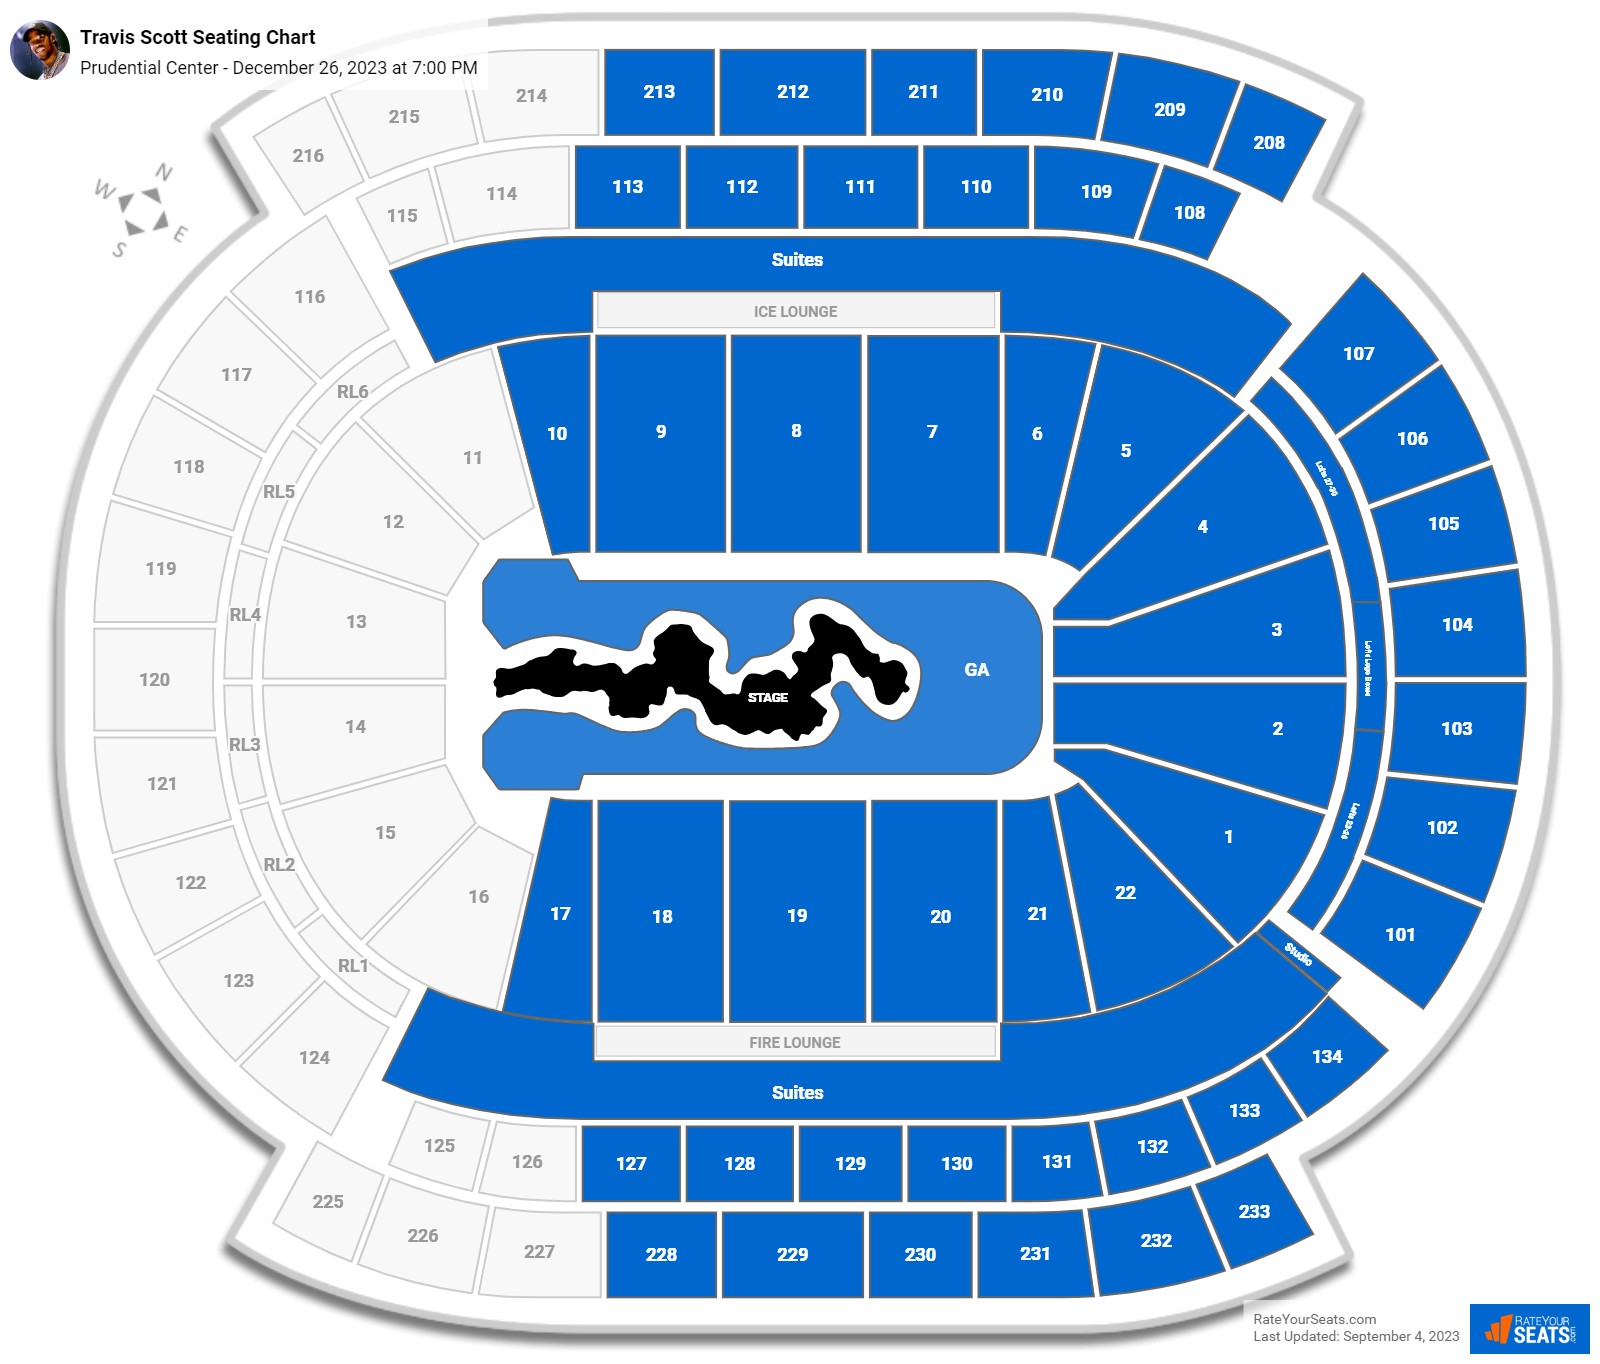 prudential center seat map｜TikTok Search